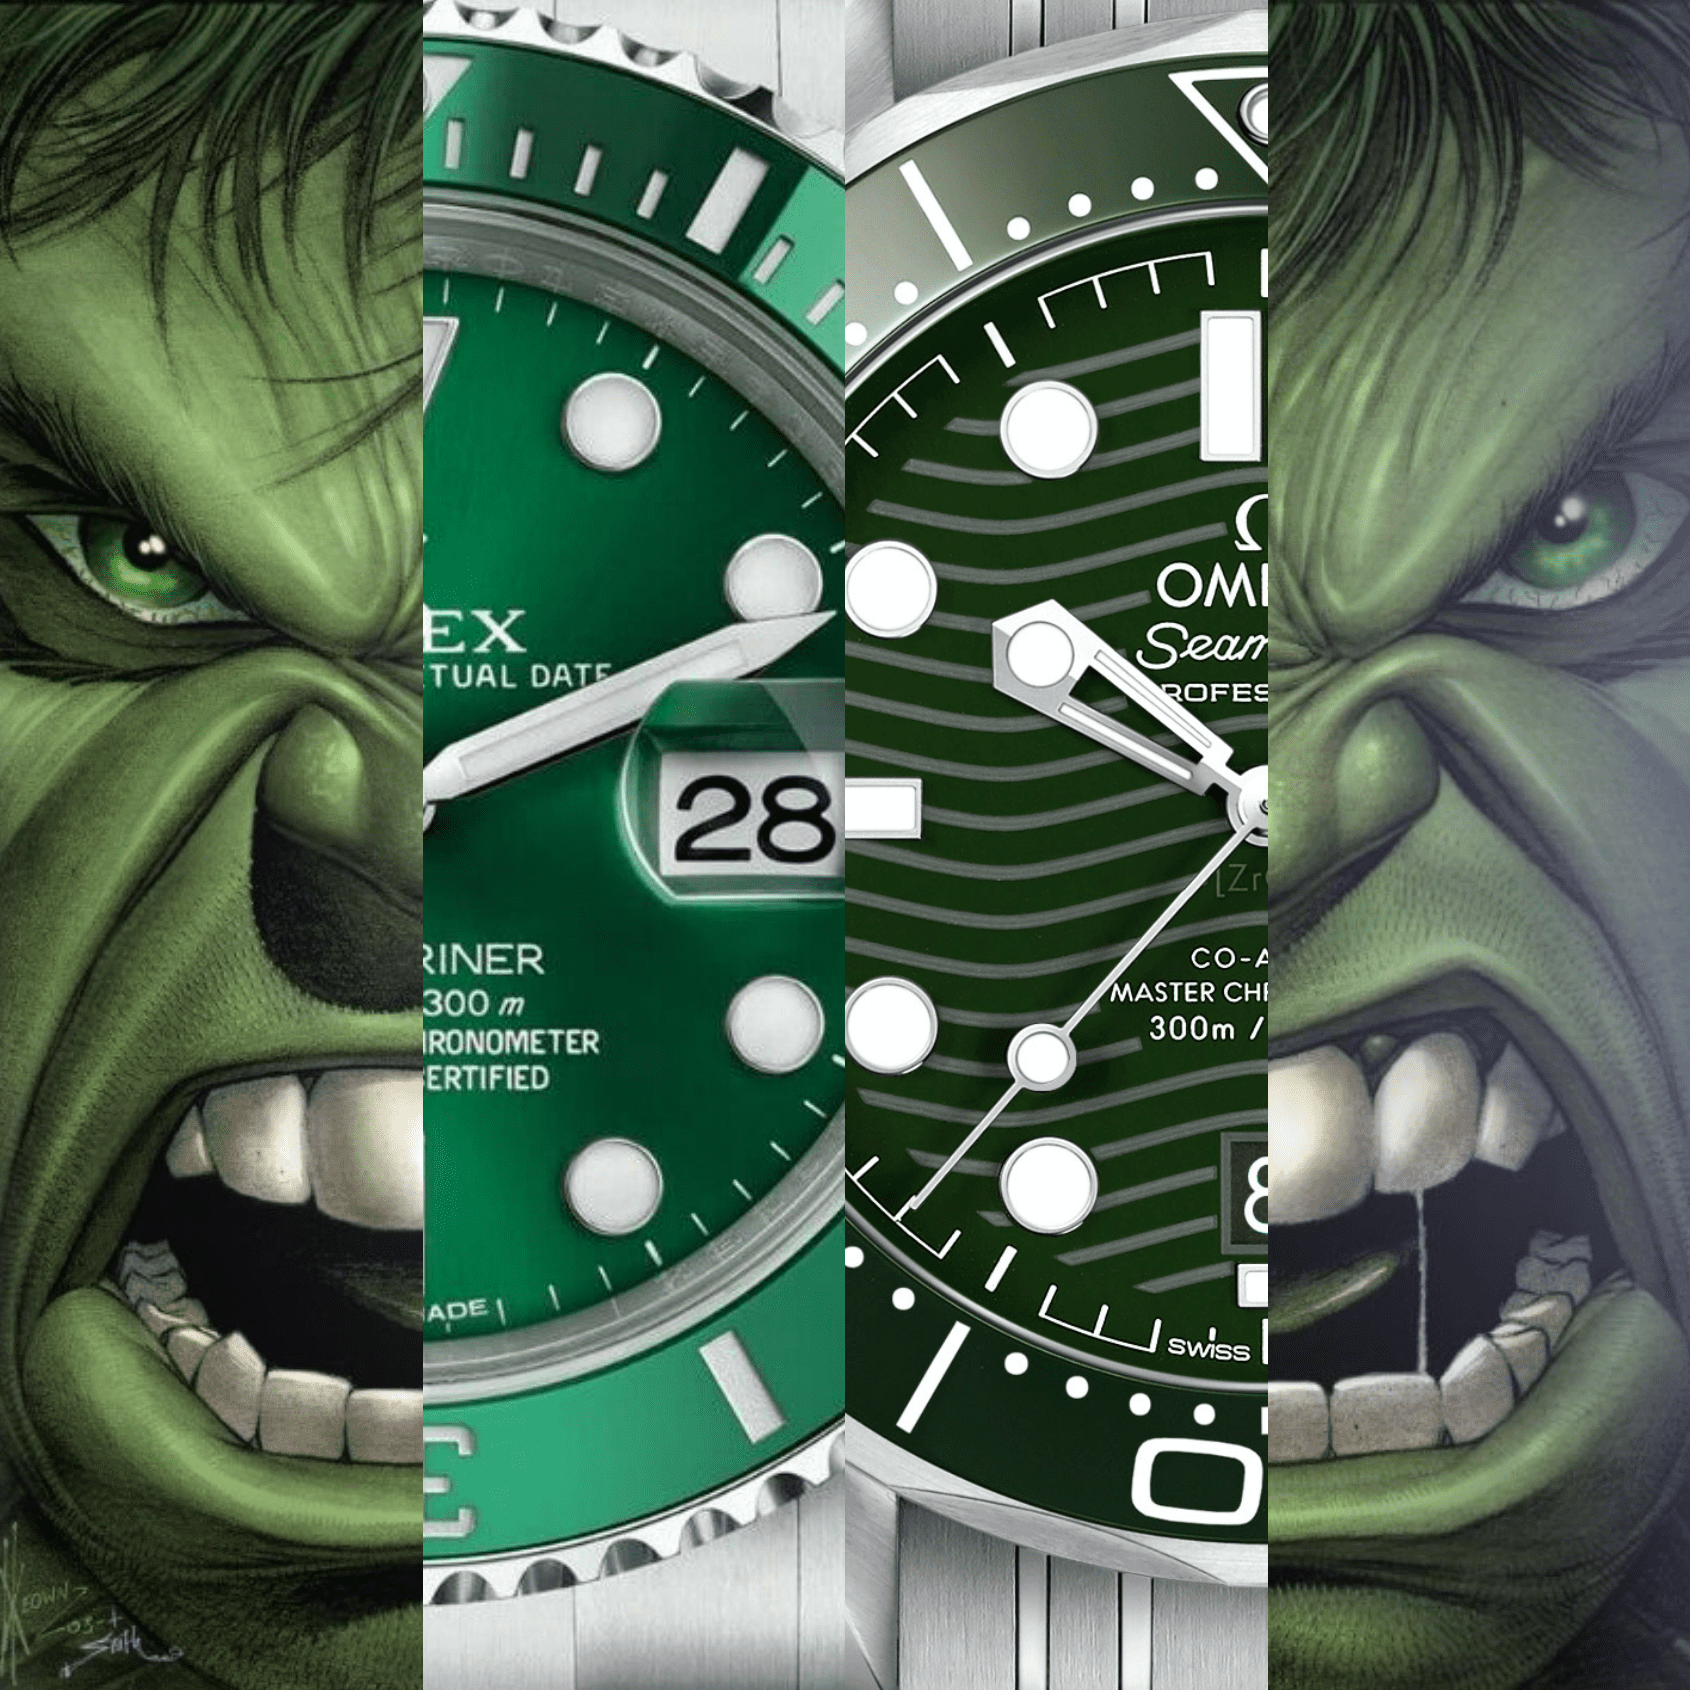 Hulk vs Hulk: How the new green Omega Seamaster Professional smashes differently